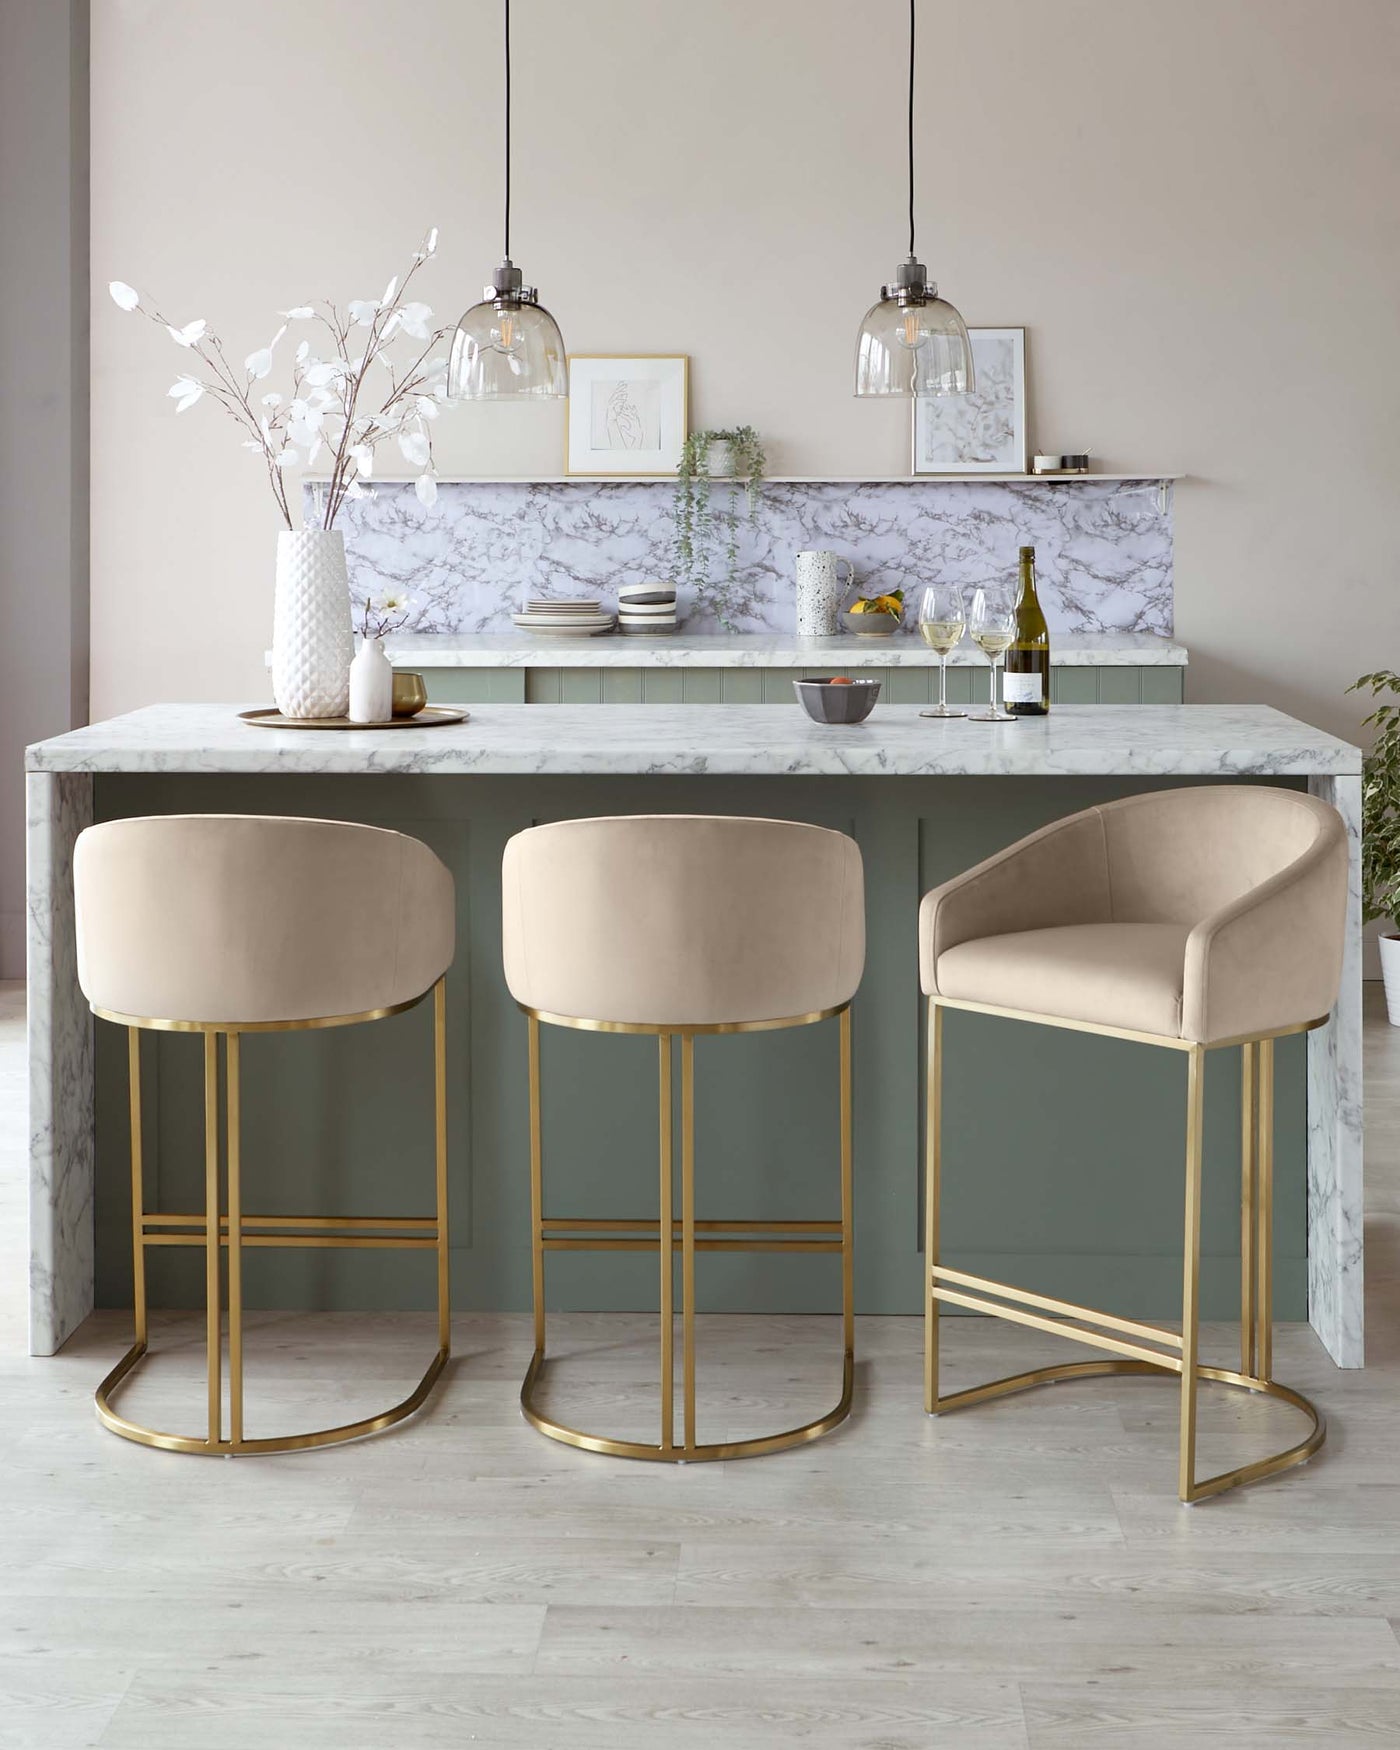 Elegant modern bar stools with blush pink upholstery and sleek gold metal frames, showcasing a circular seat design and a semi-open backrest, placed against a kitchen island with a marble countertop.